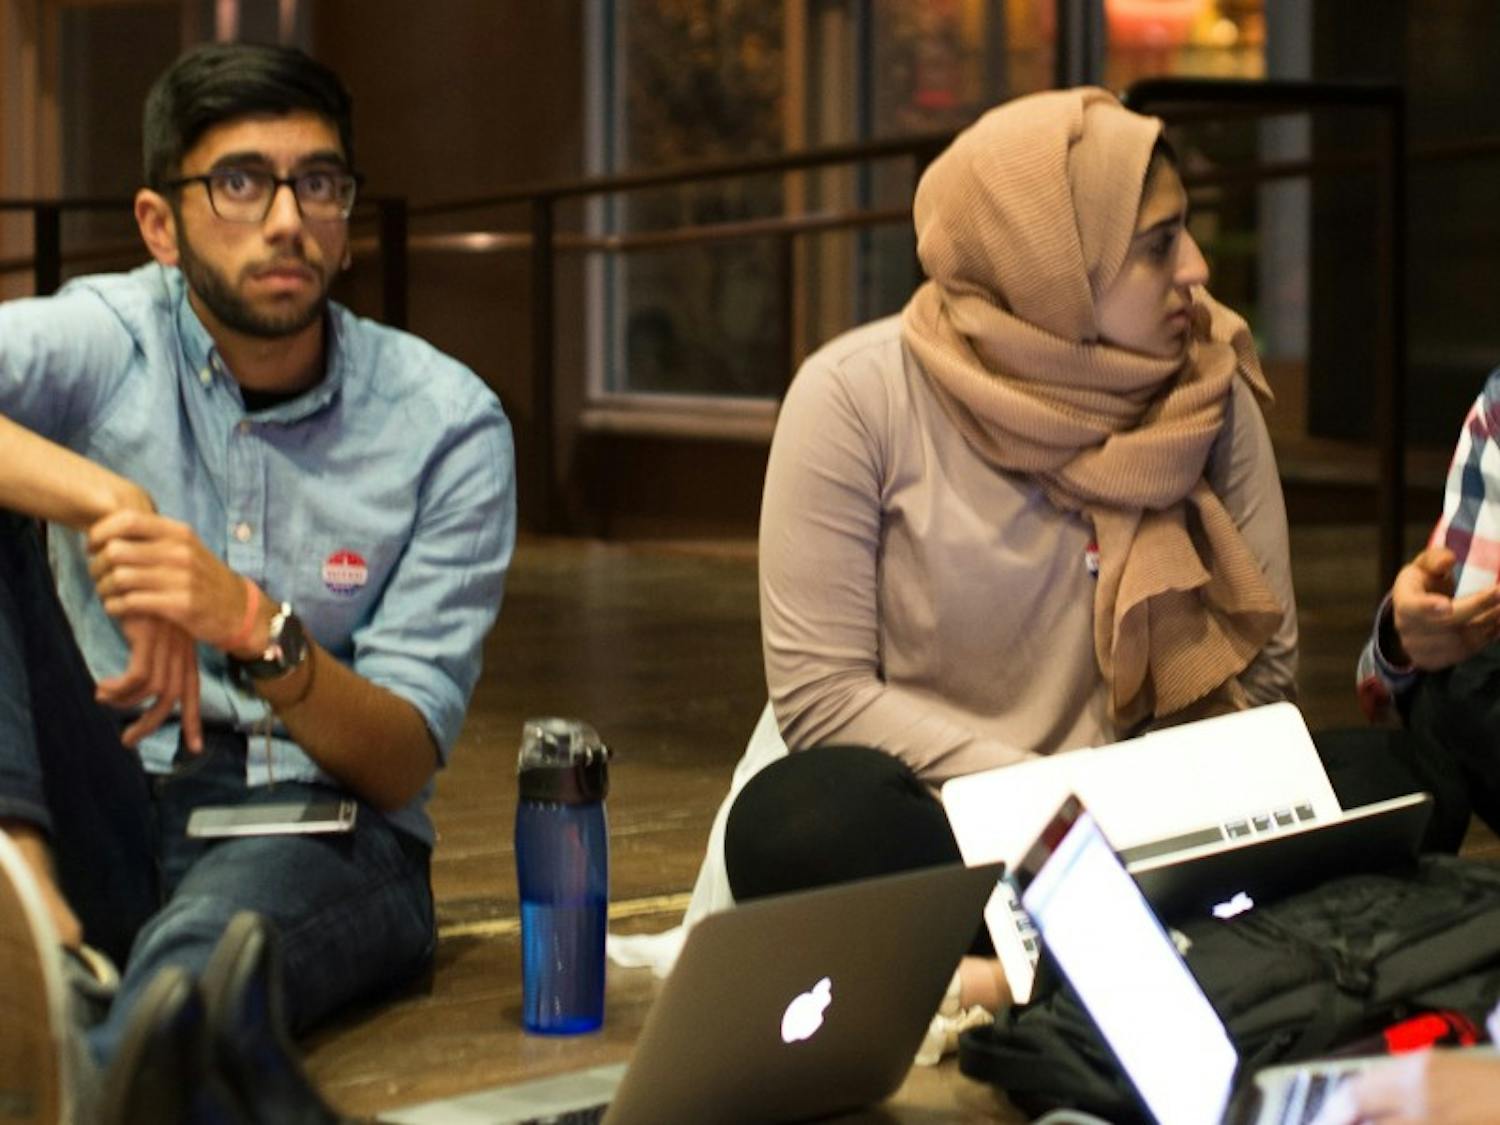 Several students, including Chair of the Shared Governance Committee Omer Arain, watch as election results pour in with Donald Trump leading.